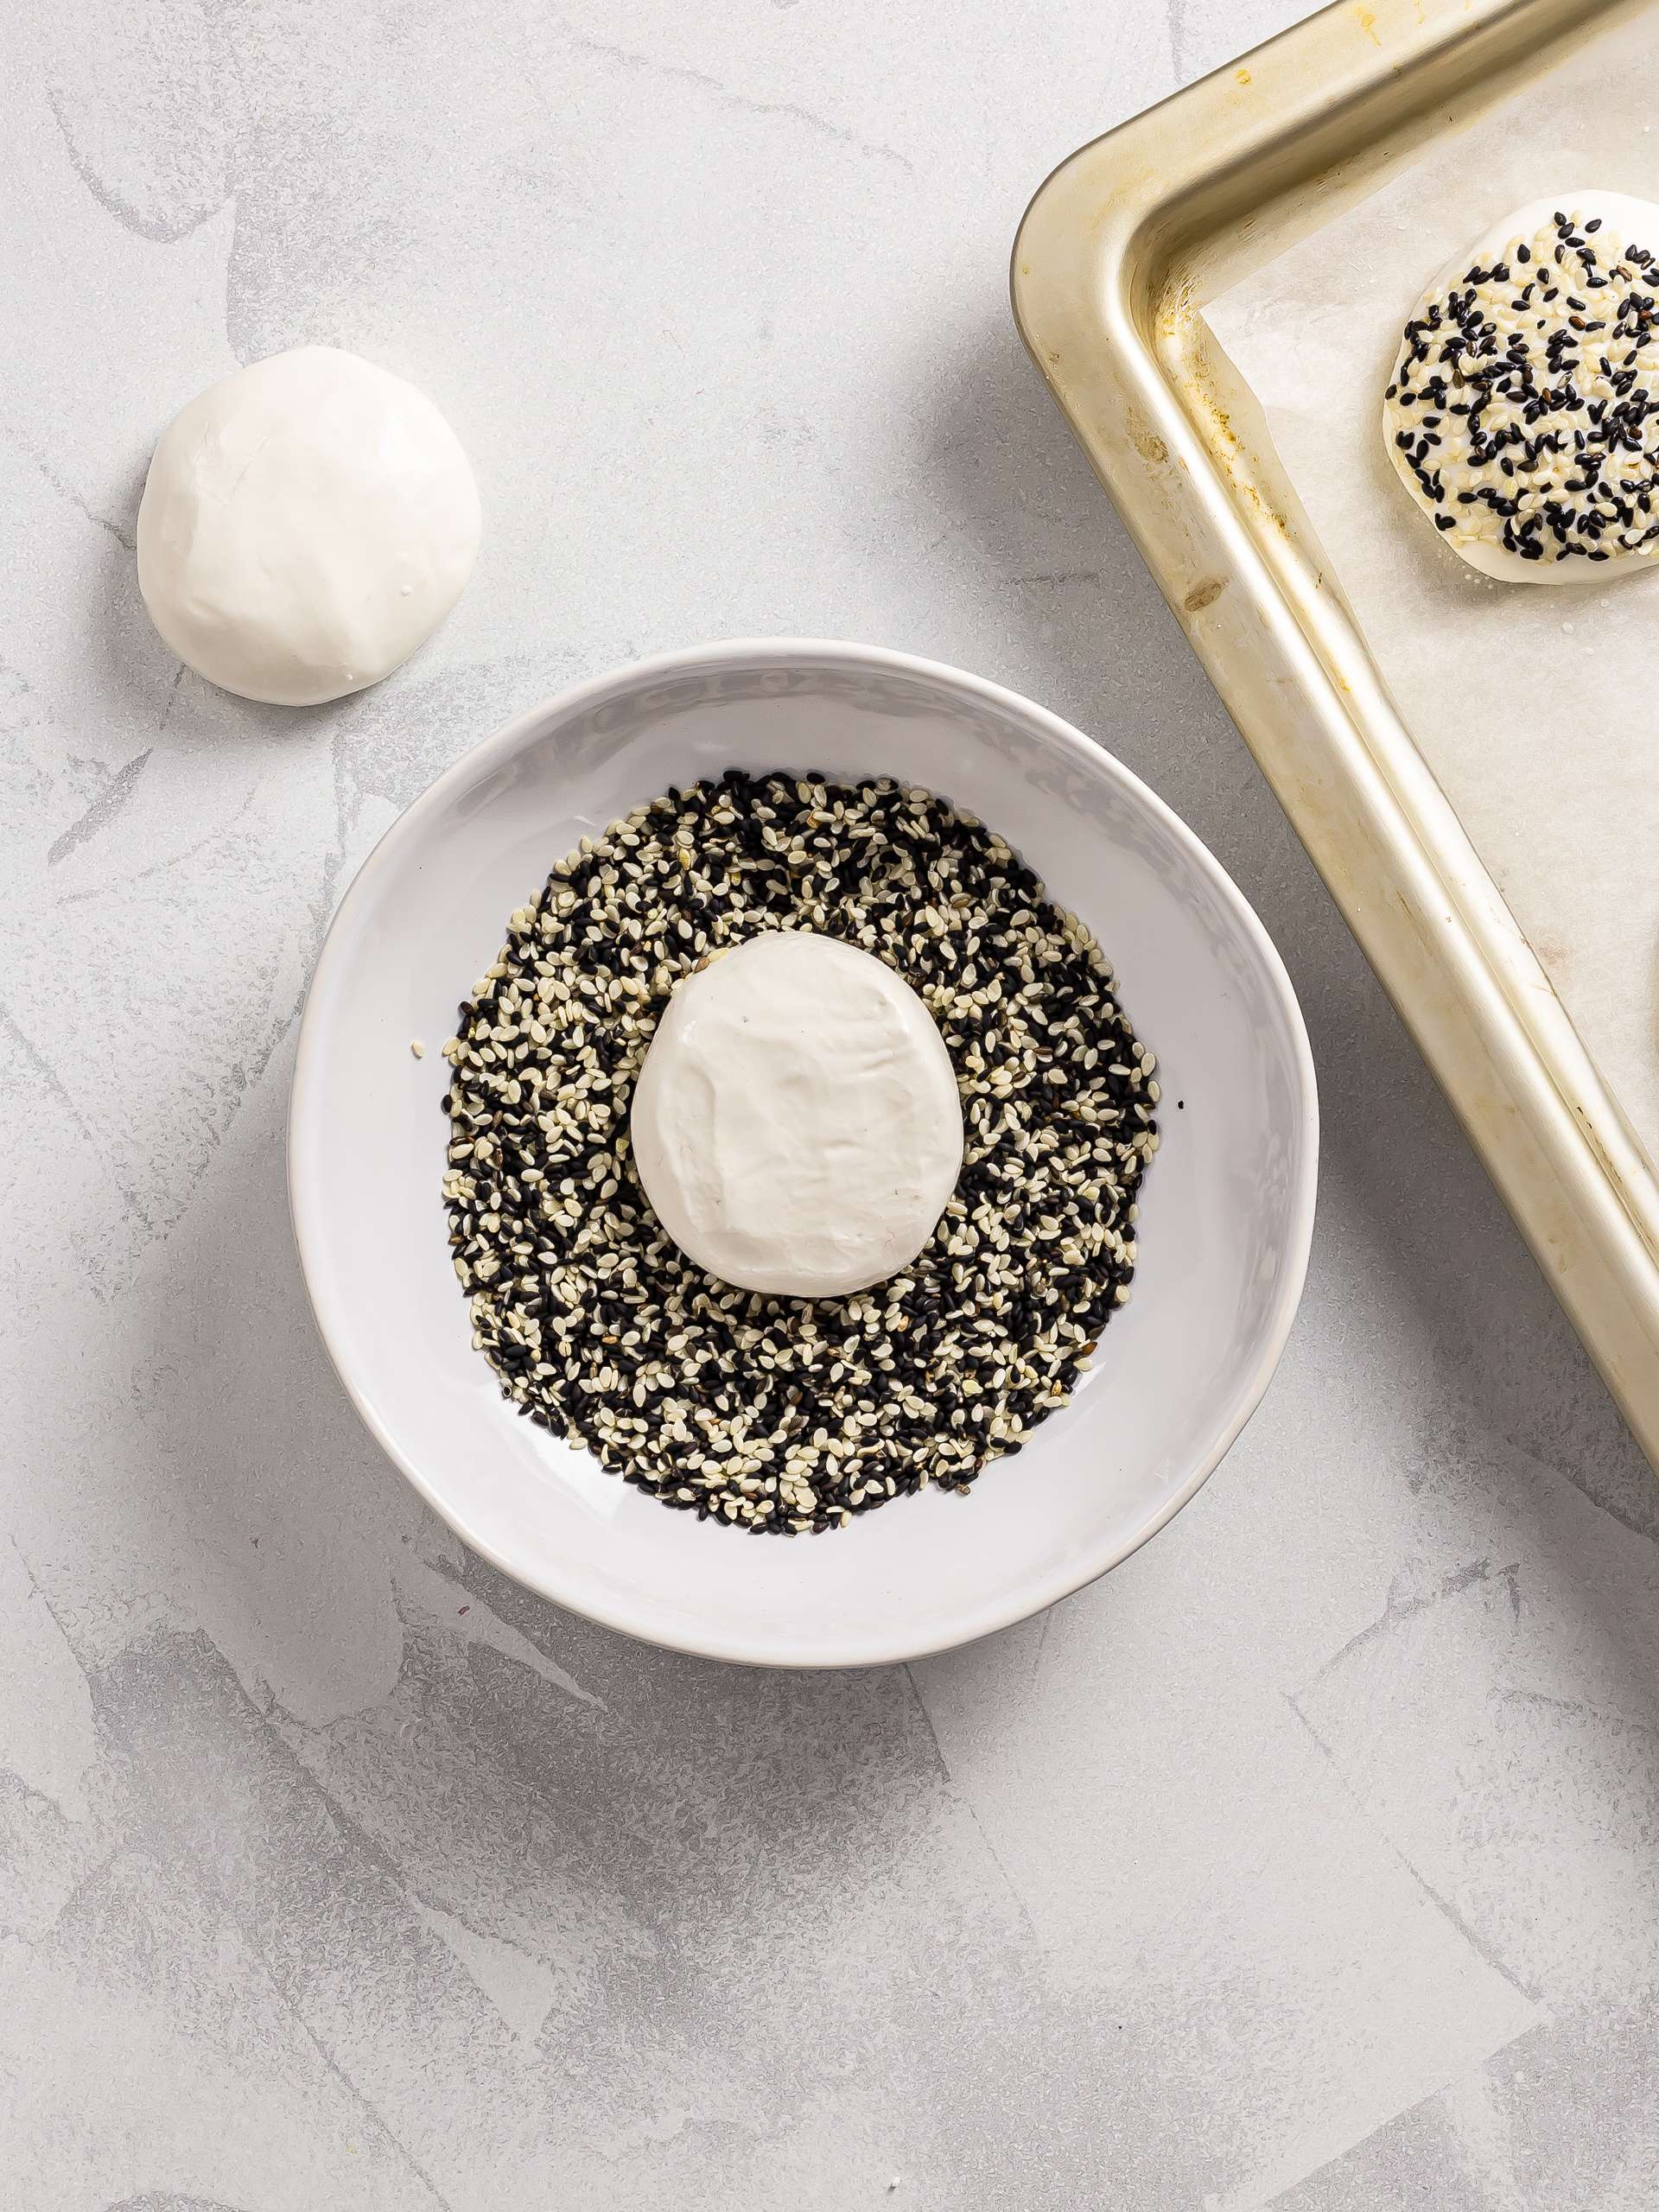 mochi bread rolls coated with black and white sesame seeds